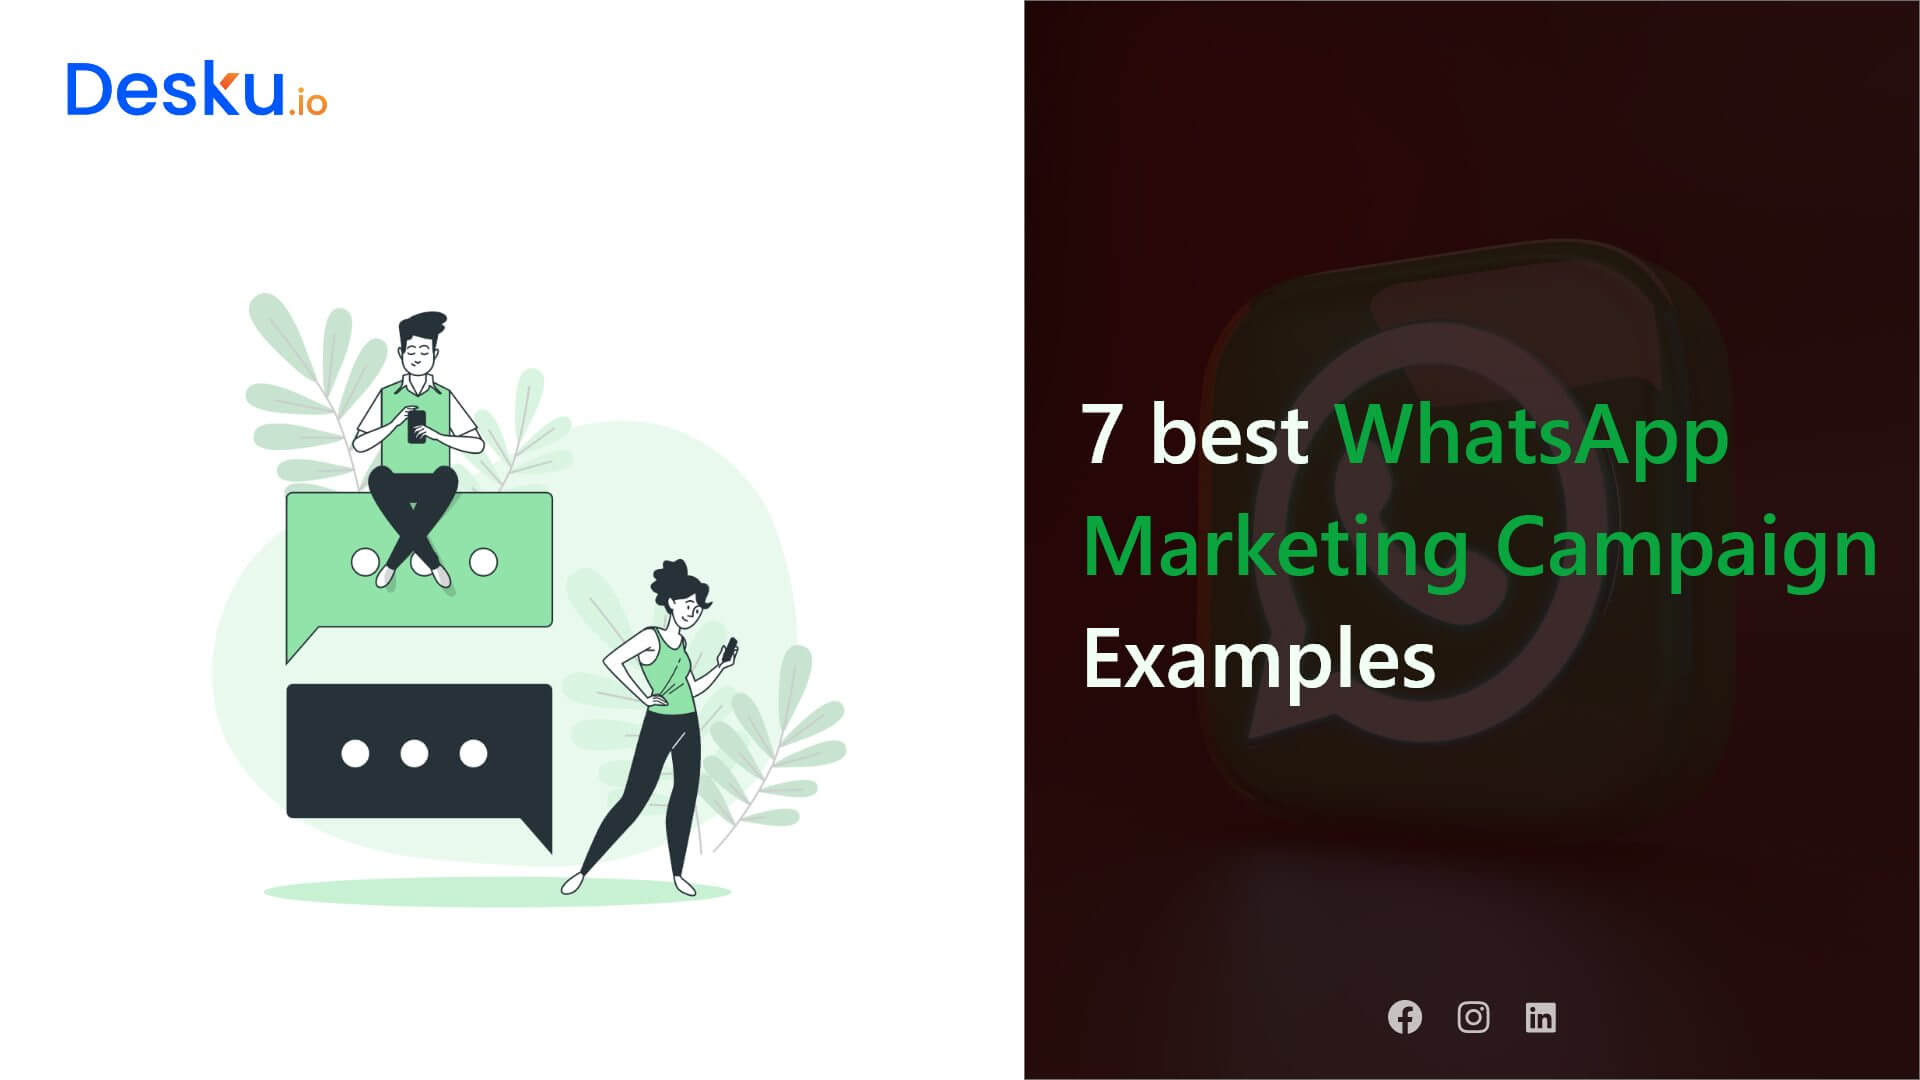 WhatsApp Marketing Campaign Examples